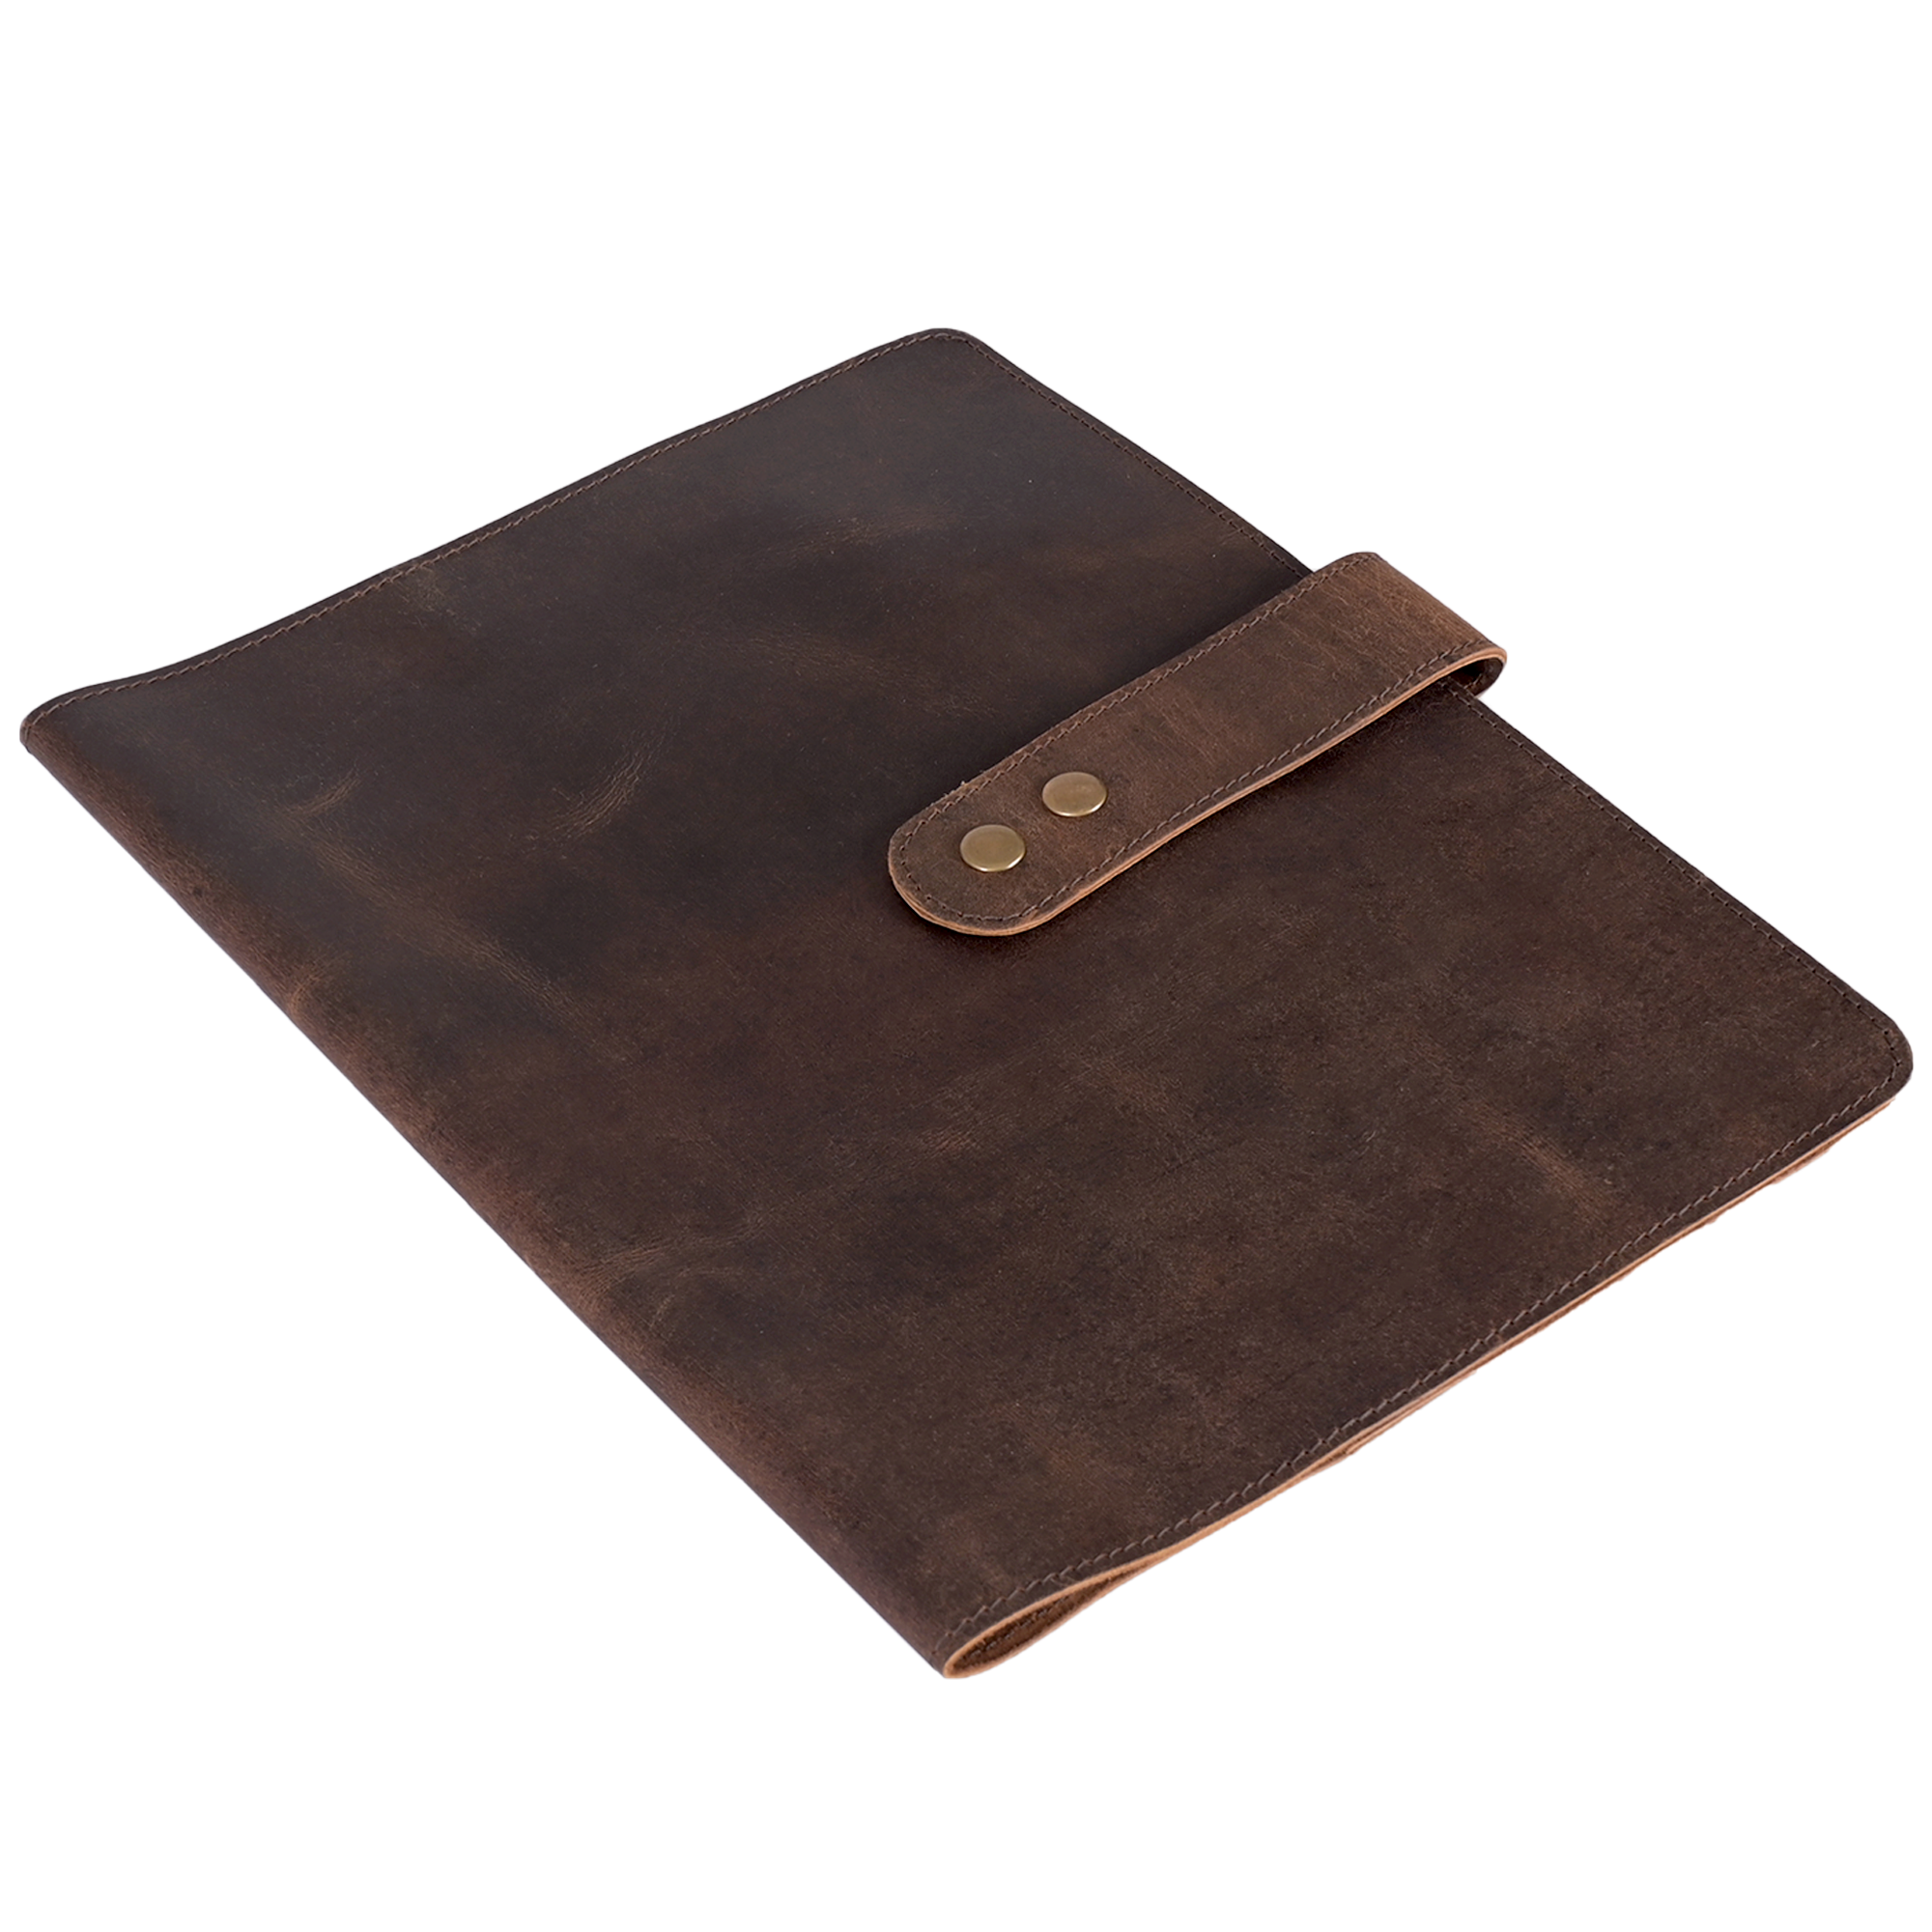 XL Leather Bible Cover